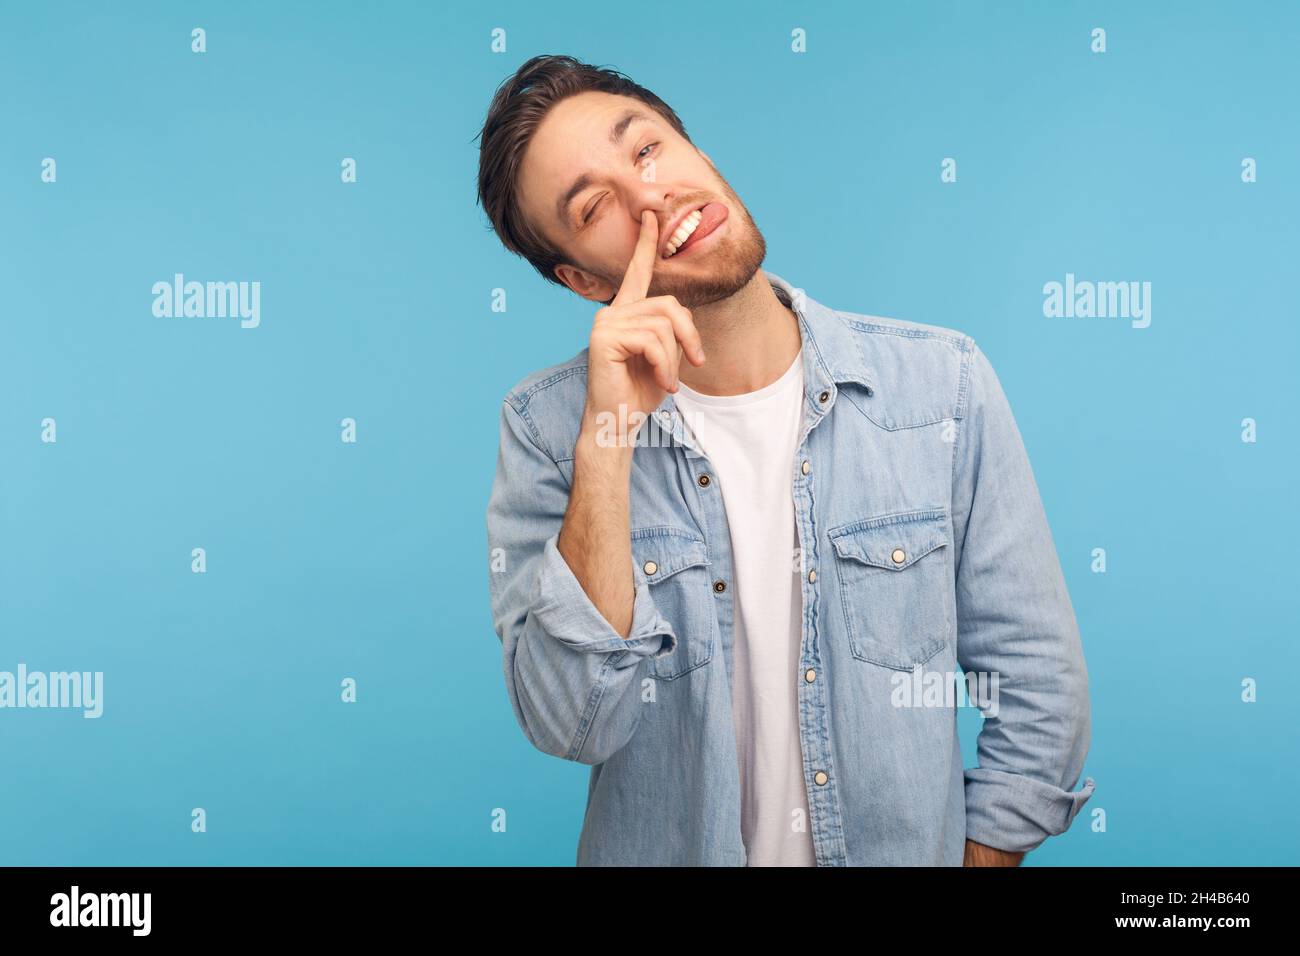 Portrait of funny man wearing denim shirt, putting finger into his nose and showing tongue, fooling around, bad habits, disrespectful behavior. Indoor studio shot isolated on blue background. Stock Photo